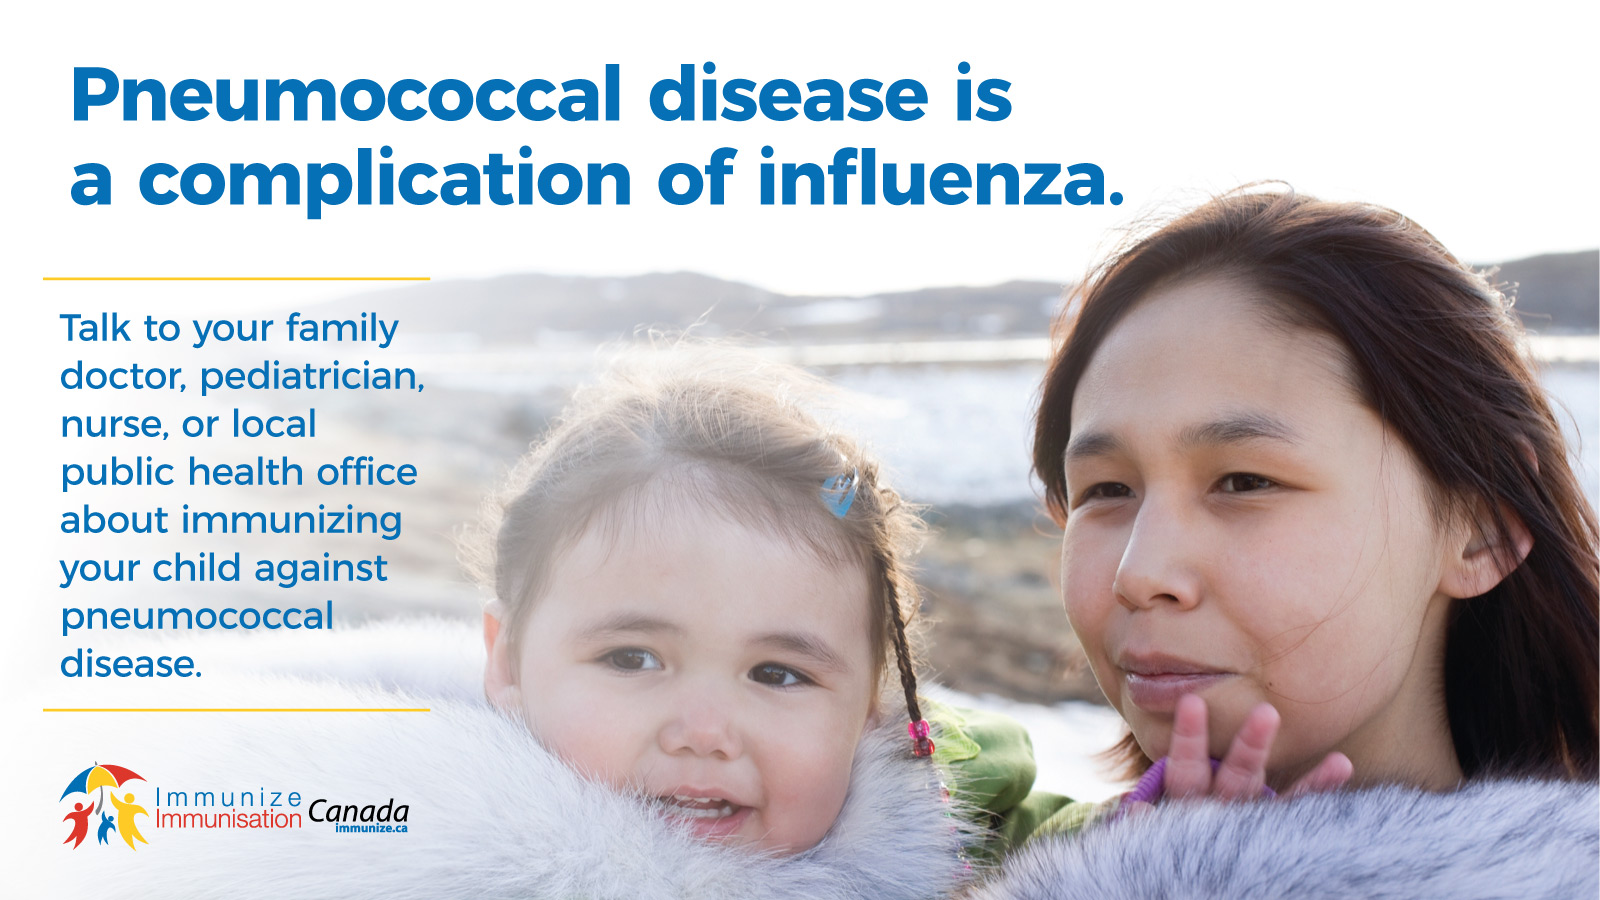 Pneumococcal disease is a complication of influenza (Twitter)